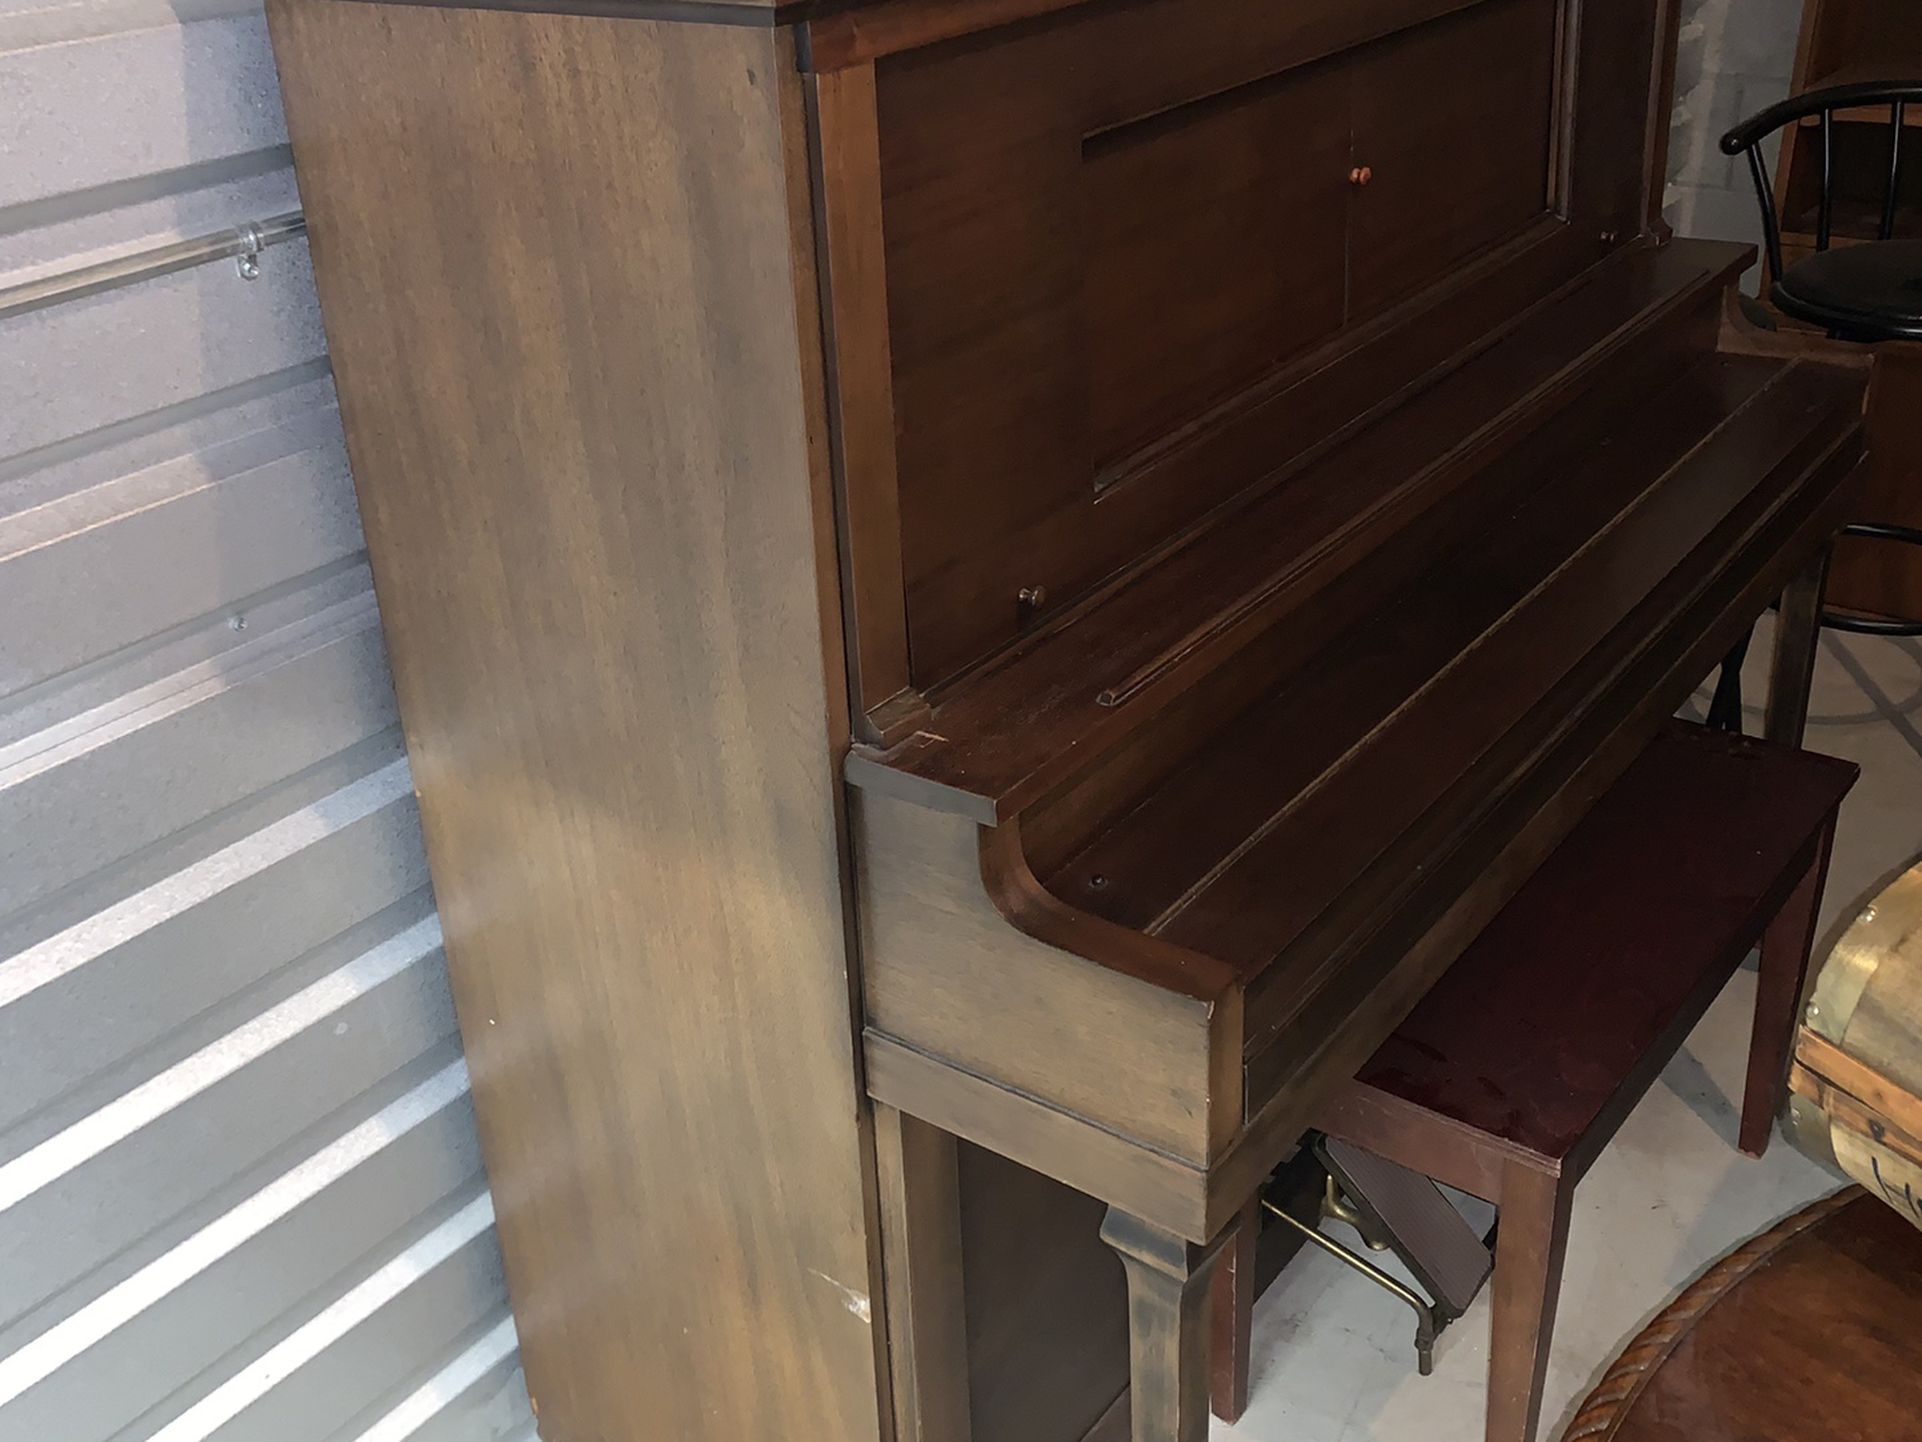 Upright Player Piano